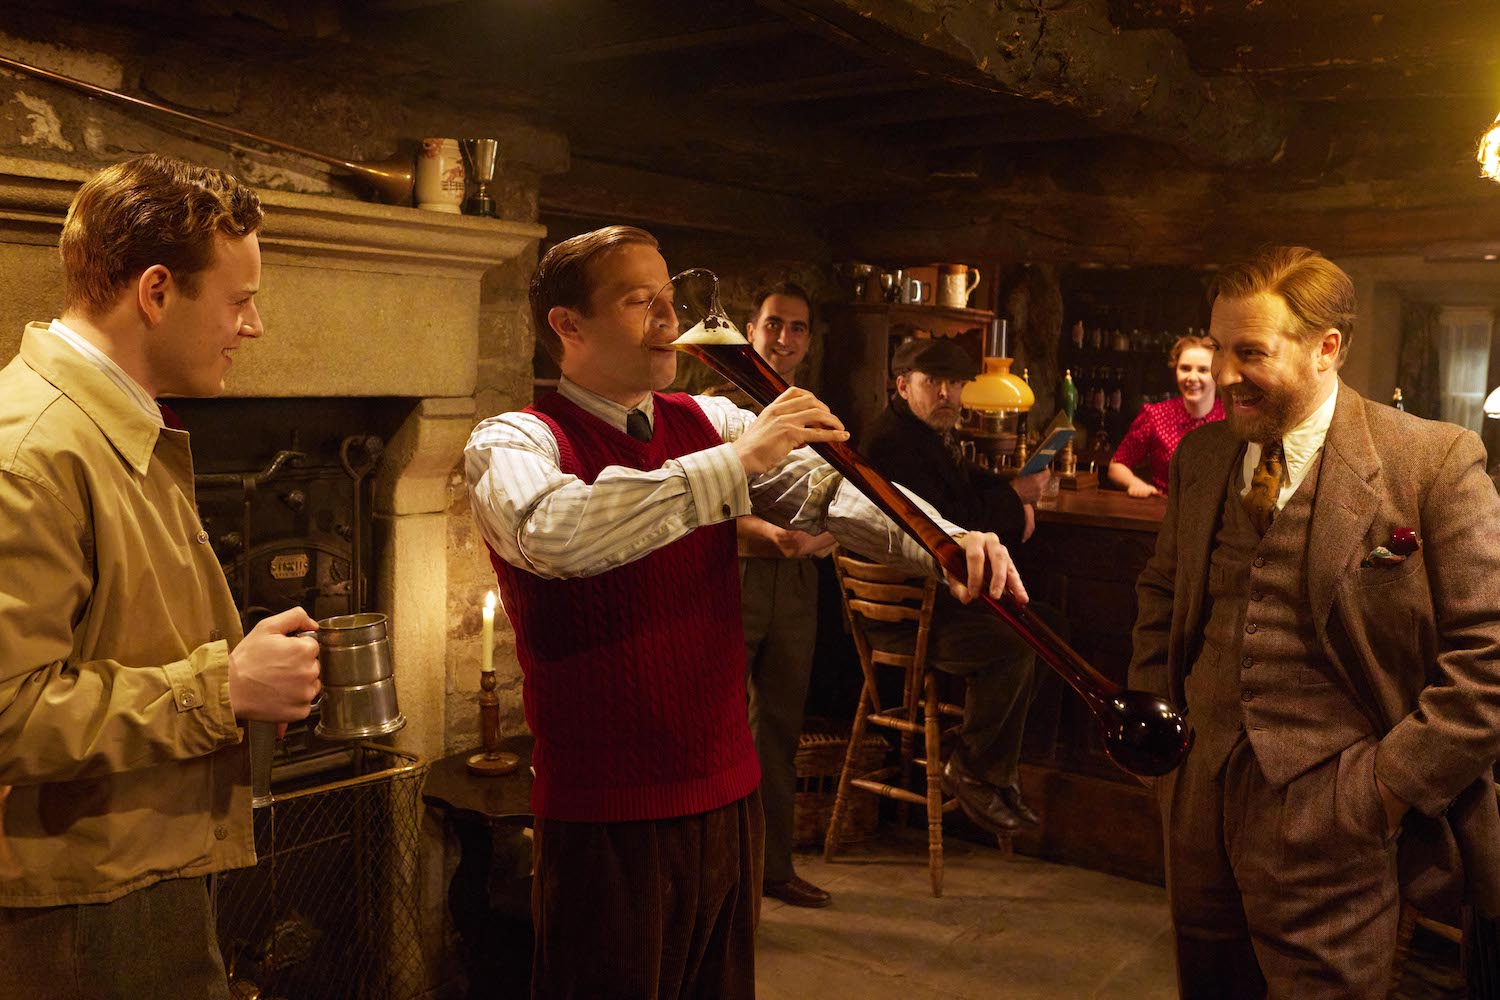 Picture shows: Tristan (Callum Woodhouse) and Siegfried (Samuel West) stand on either side of James (Nicholas Ralph) as he chugs a yard of ale in the pub. They are laughing and encouraging him.